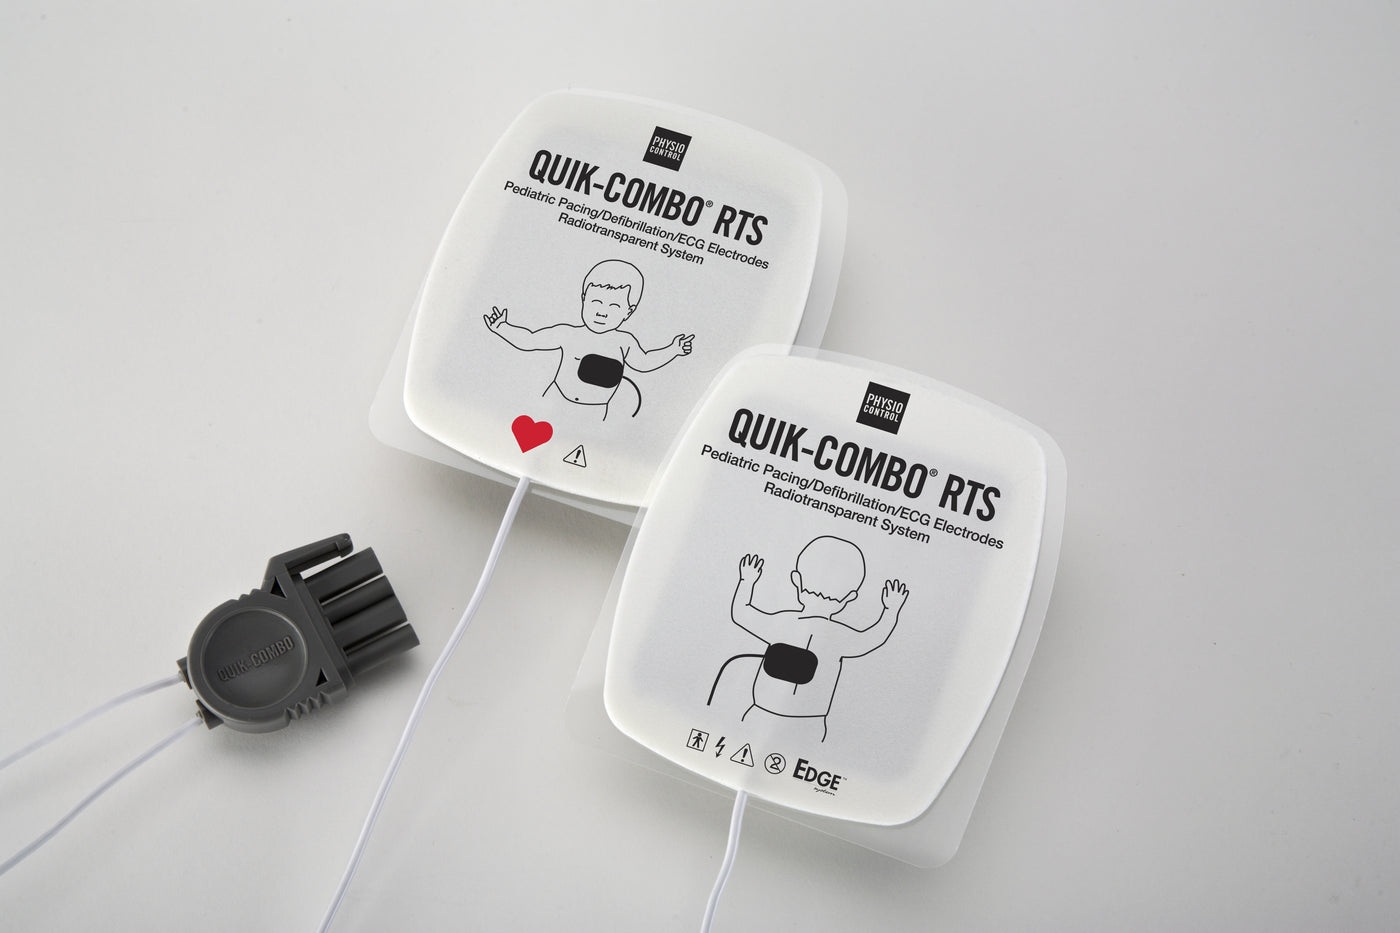 Edge System Pediatric RTS Electrodes with QUIK-COMBO Connector